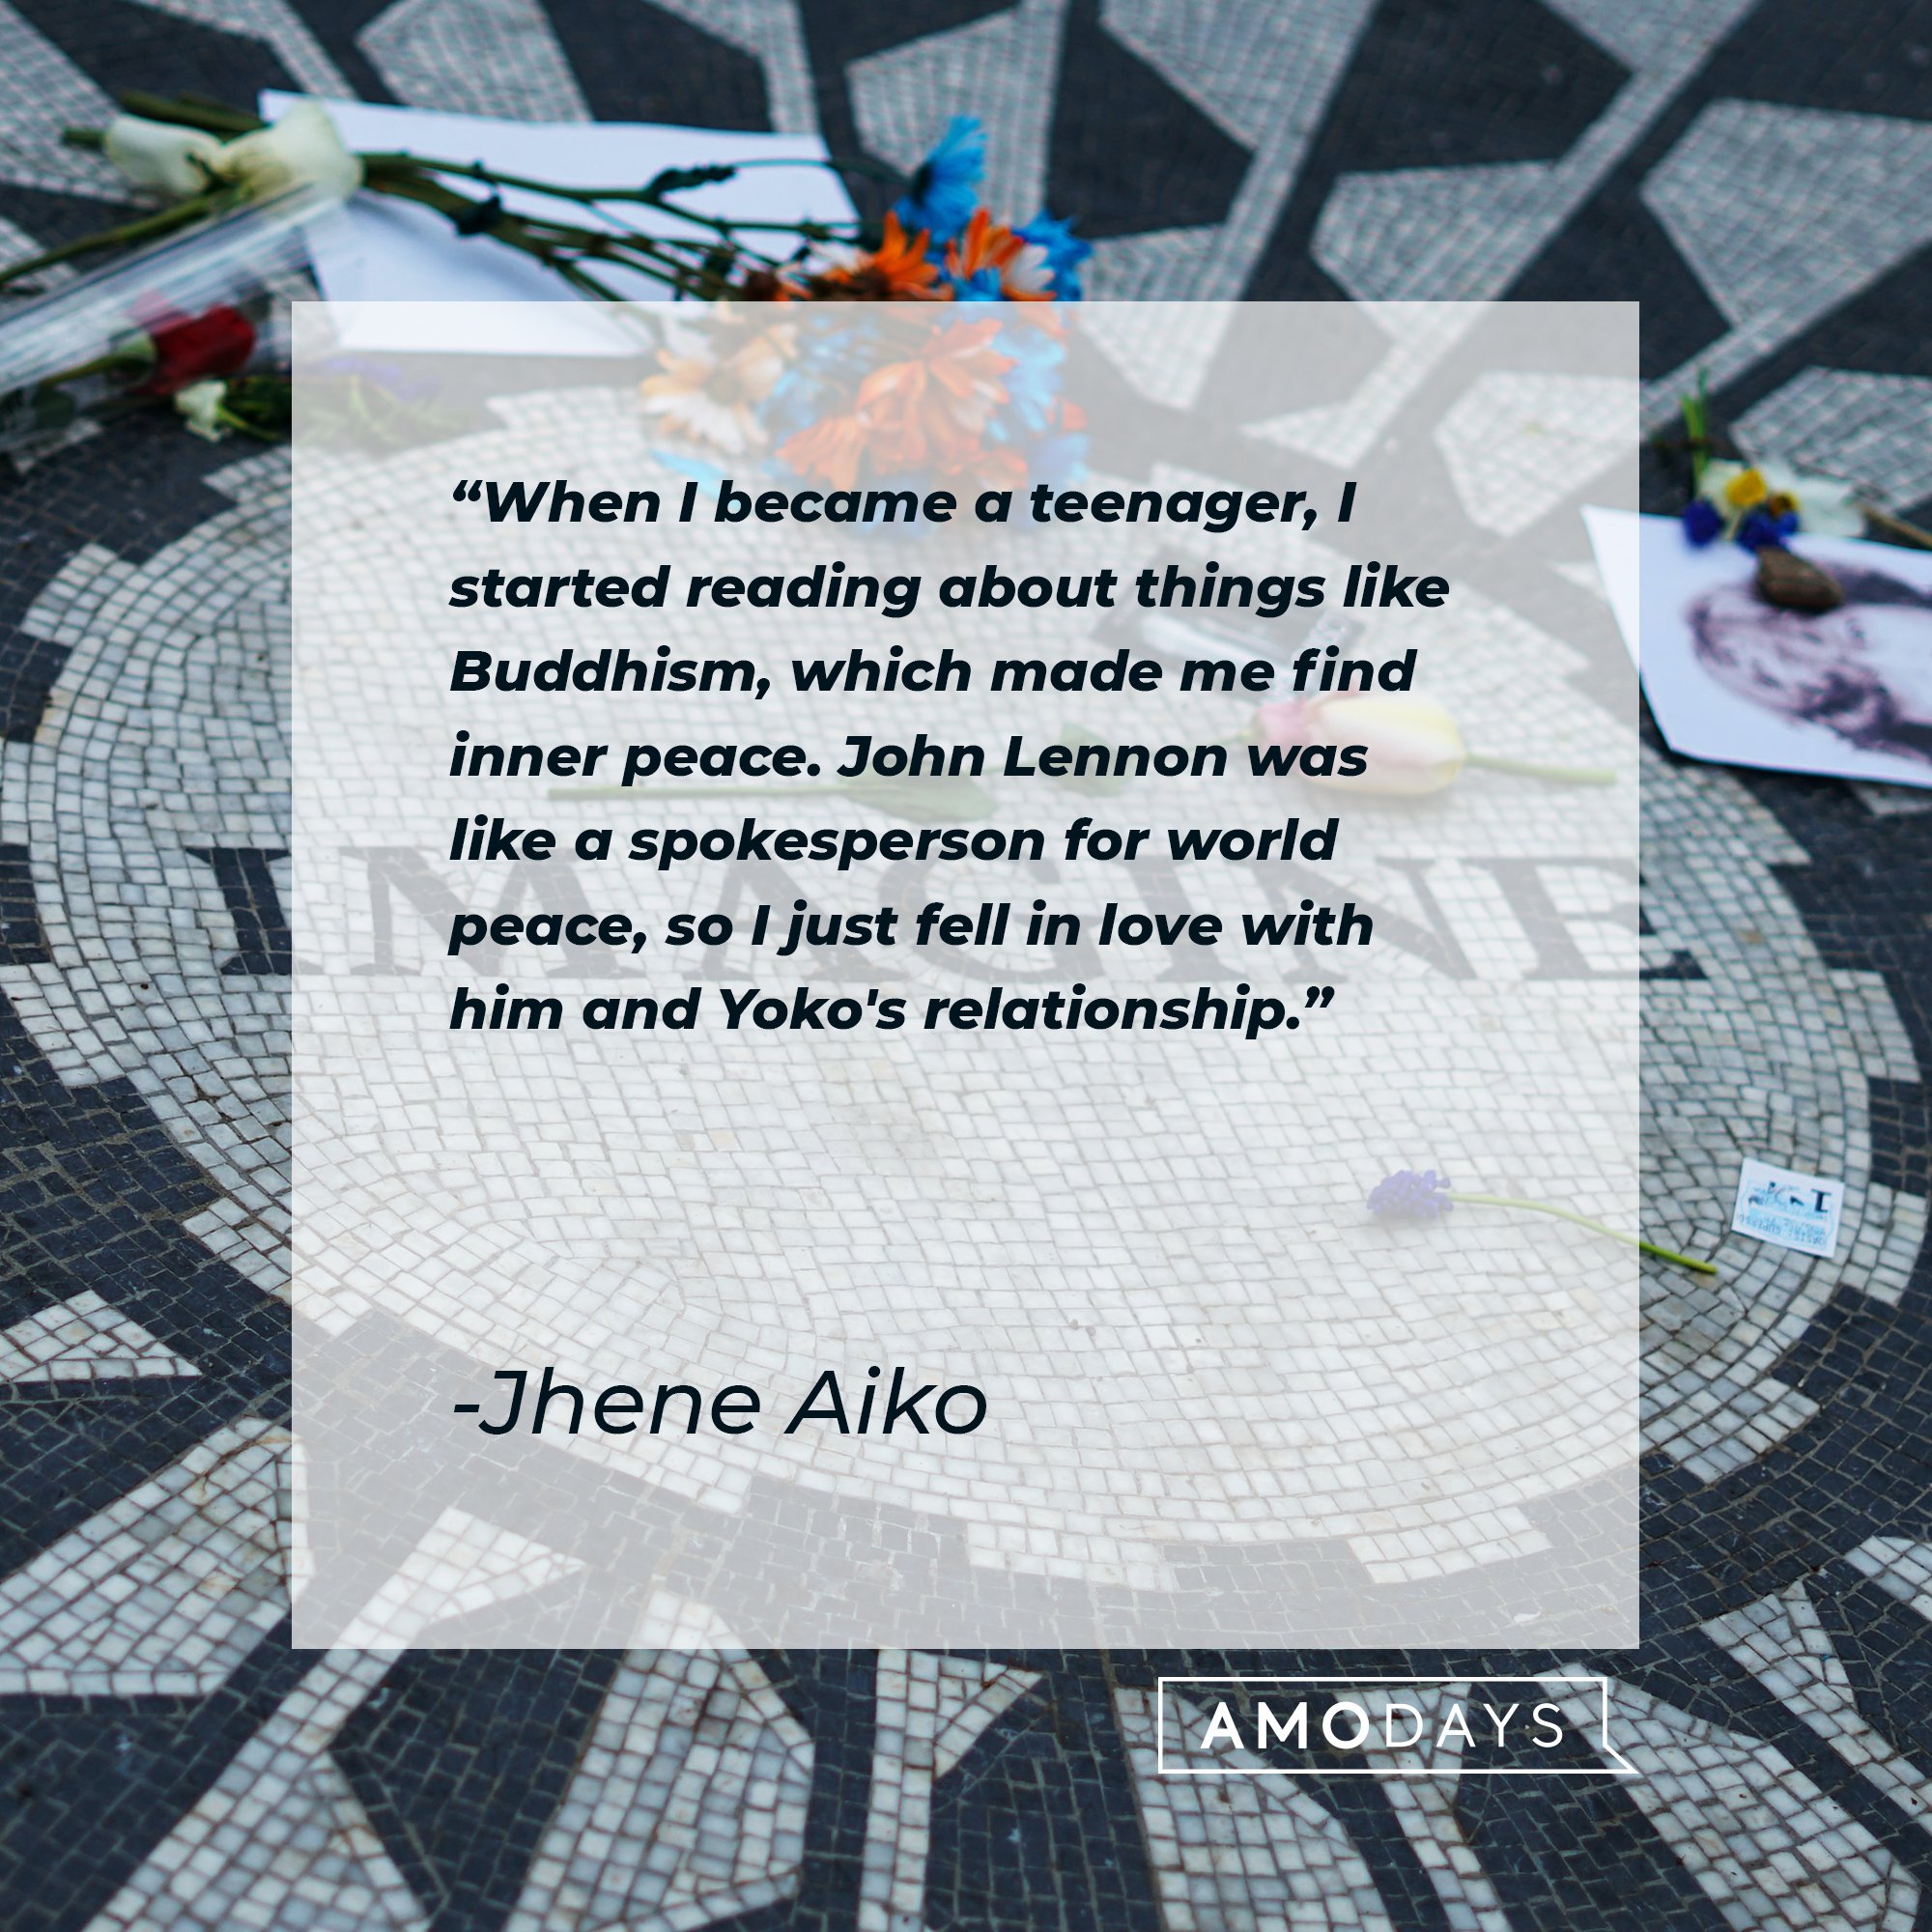   Jhene Aiko's quote: “When I became a teenager, I started reading about things like Buddhism, which made me find inner peace. John Lennon was like a spokesperson for world peace, so I just fell in love with him and Yoko's relationship." |  Image: AmoDays